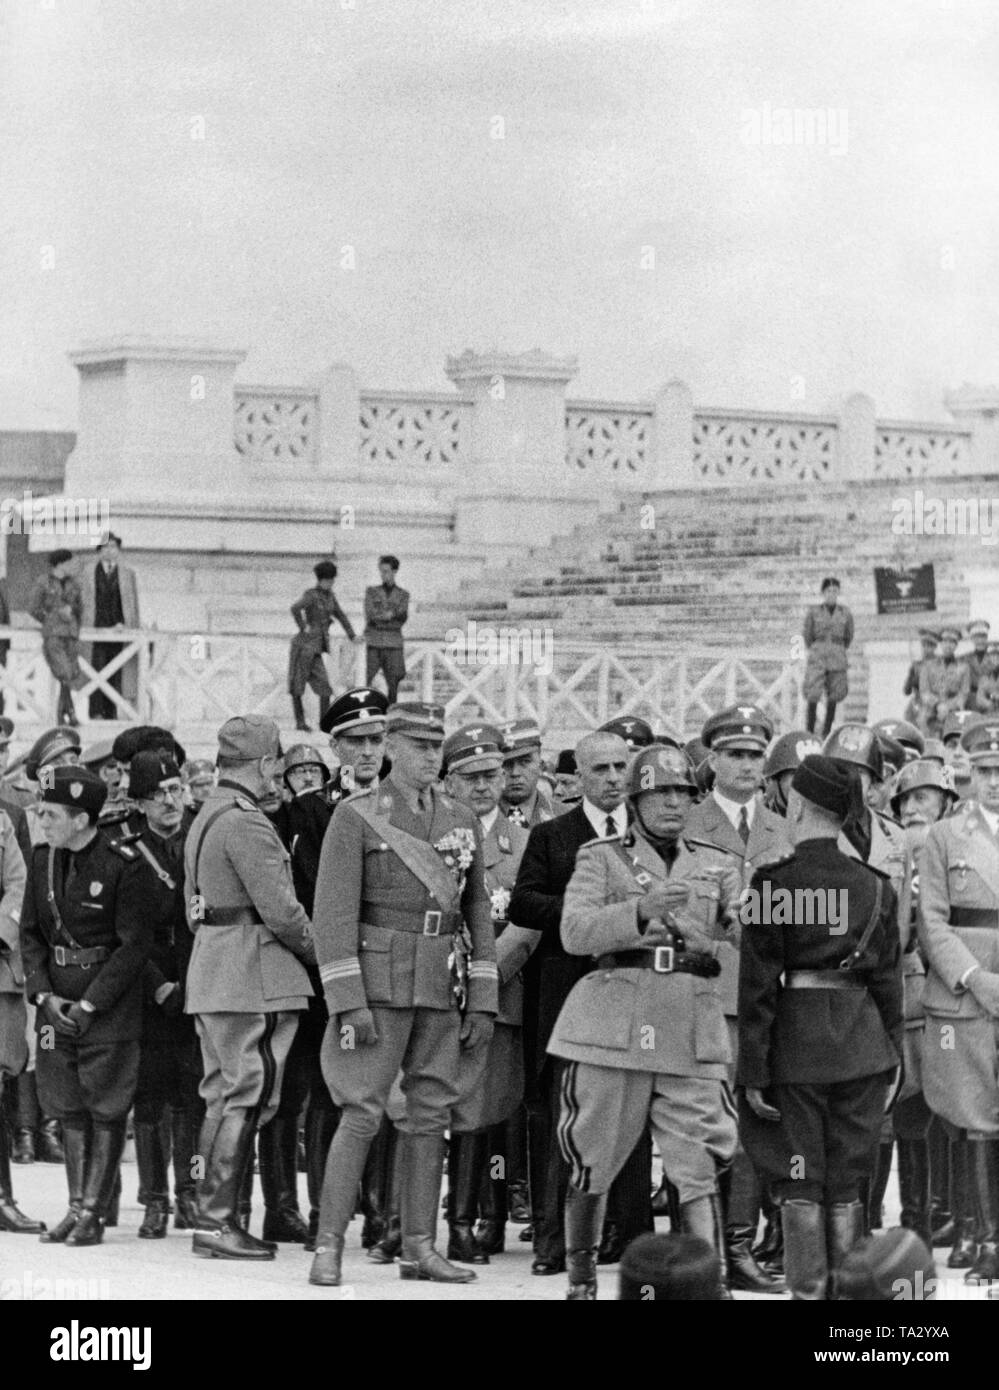 In front of the 'Altar of the Fatherland' (Monumento Nazionale a Vittorio Emmanuele II)  the Duce Benito Mussolini (center, with steel helmet), members of the fascist militia and foreign guests commemorate the fallen Italian legionaries of the Spanish Civil War  in Rome on October 31. Mussolini honors a fascist militiaman (Blackshirt). Behind the Duce from left to right : Viktor Lutze (Chief of Staff of the SA), Gauleiter Robert Wagner, Minister of the Reich Rudolf Hess, Marschall Emilio de Bono (with steel helmet) and Minister of the Reich Hans Frank (right edge of the picture). Stock Photo